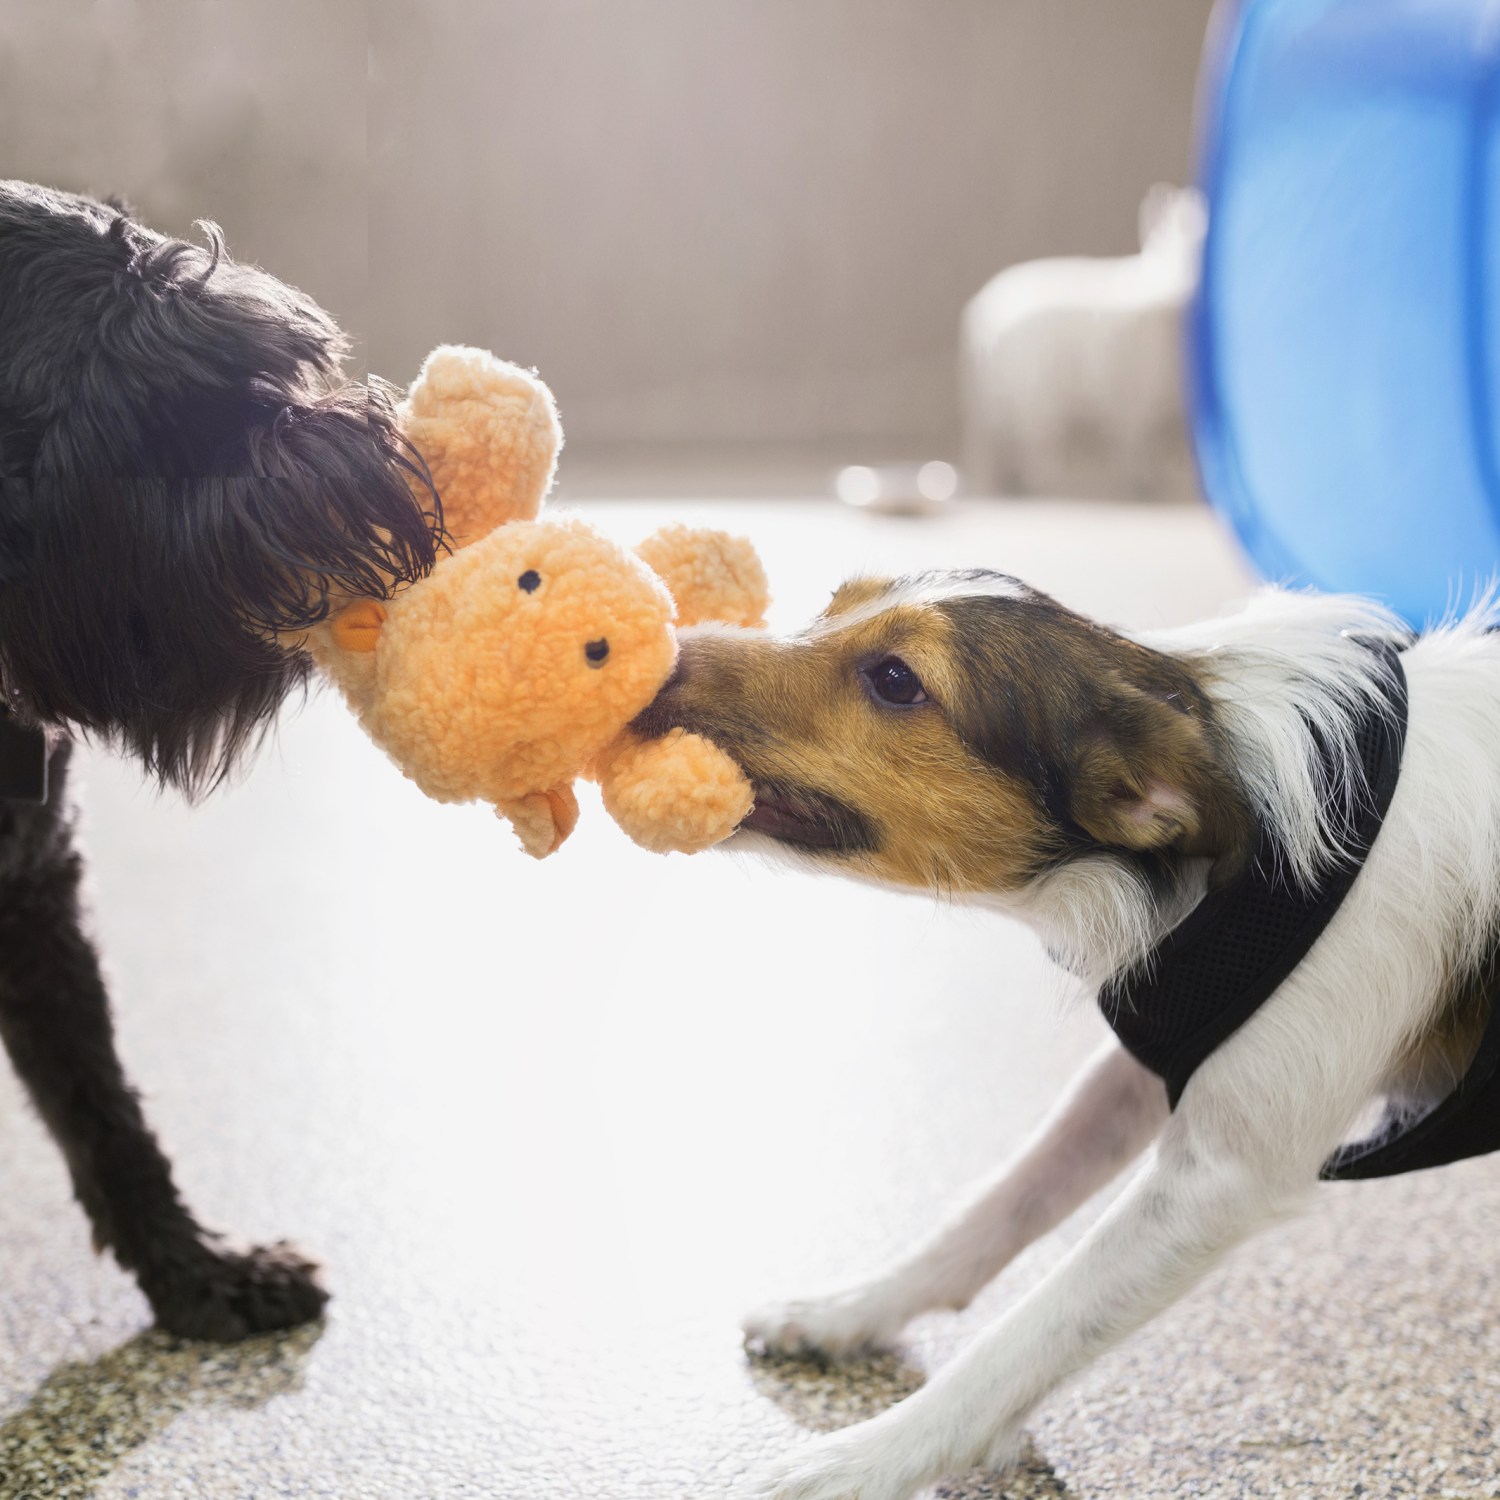 Two dogs fighting over a stuffed animal | Negotiating house price